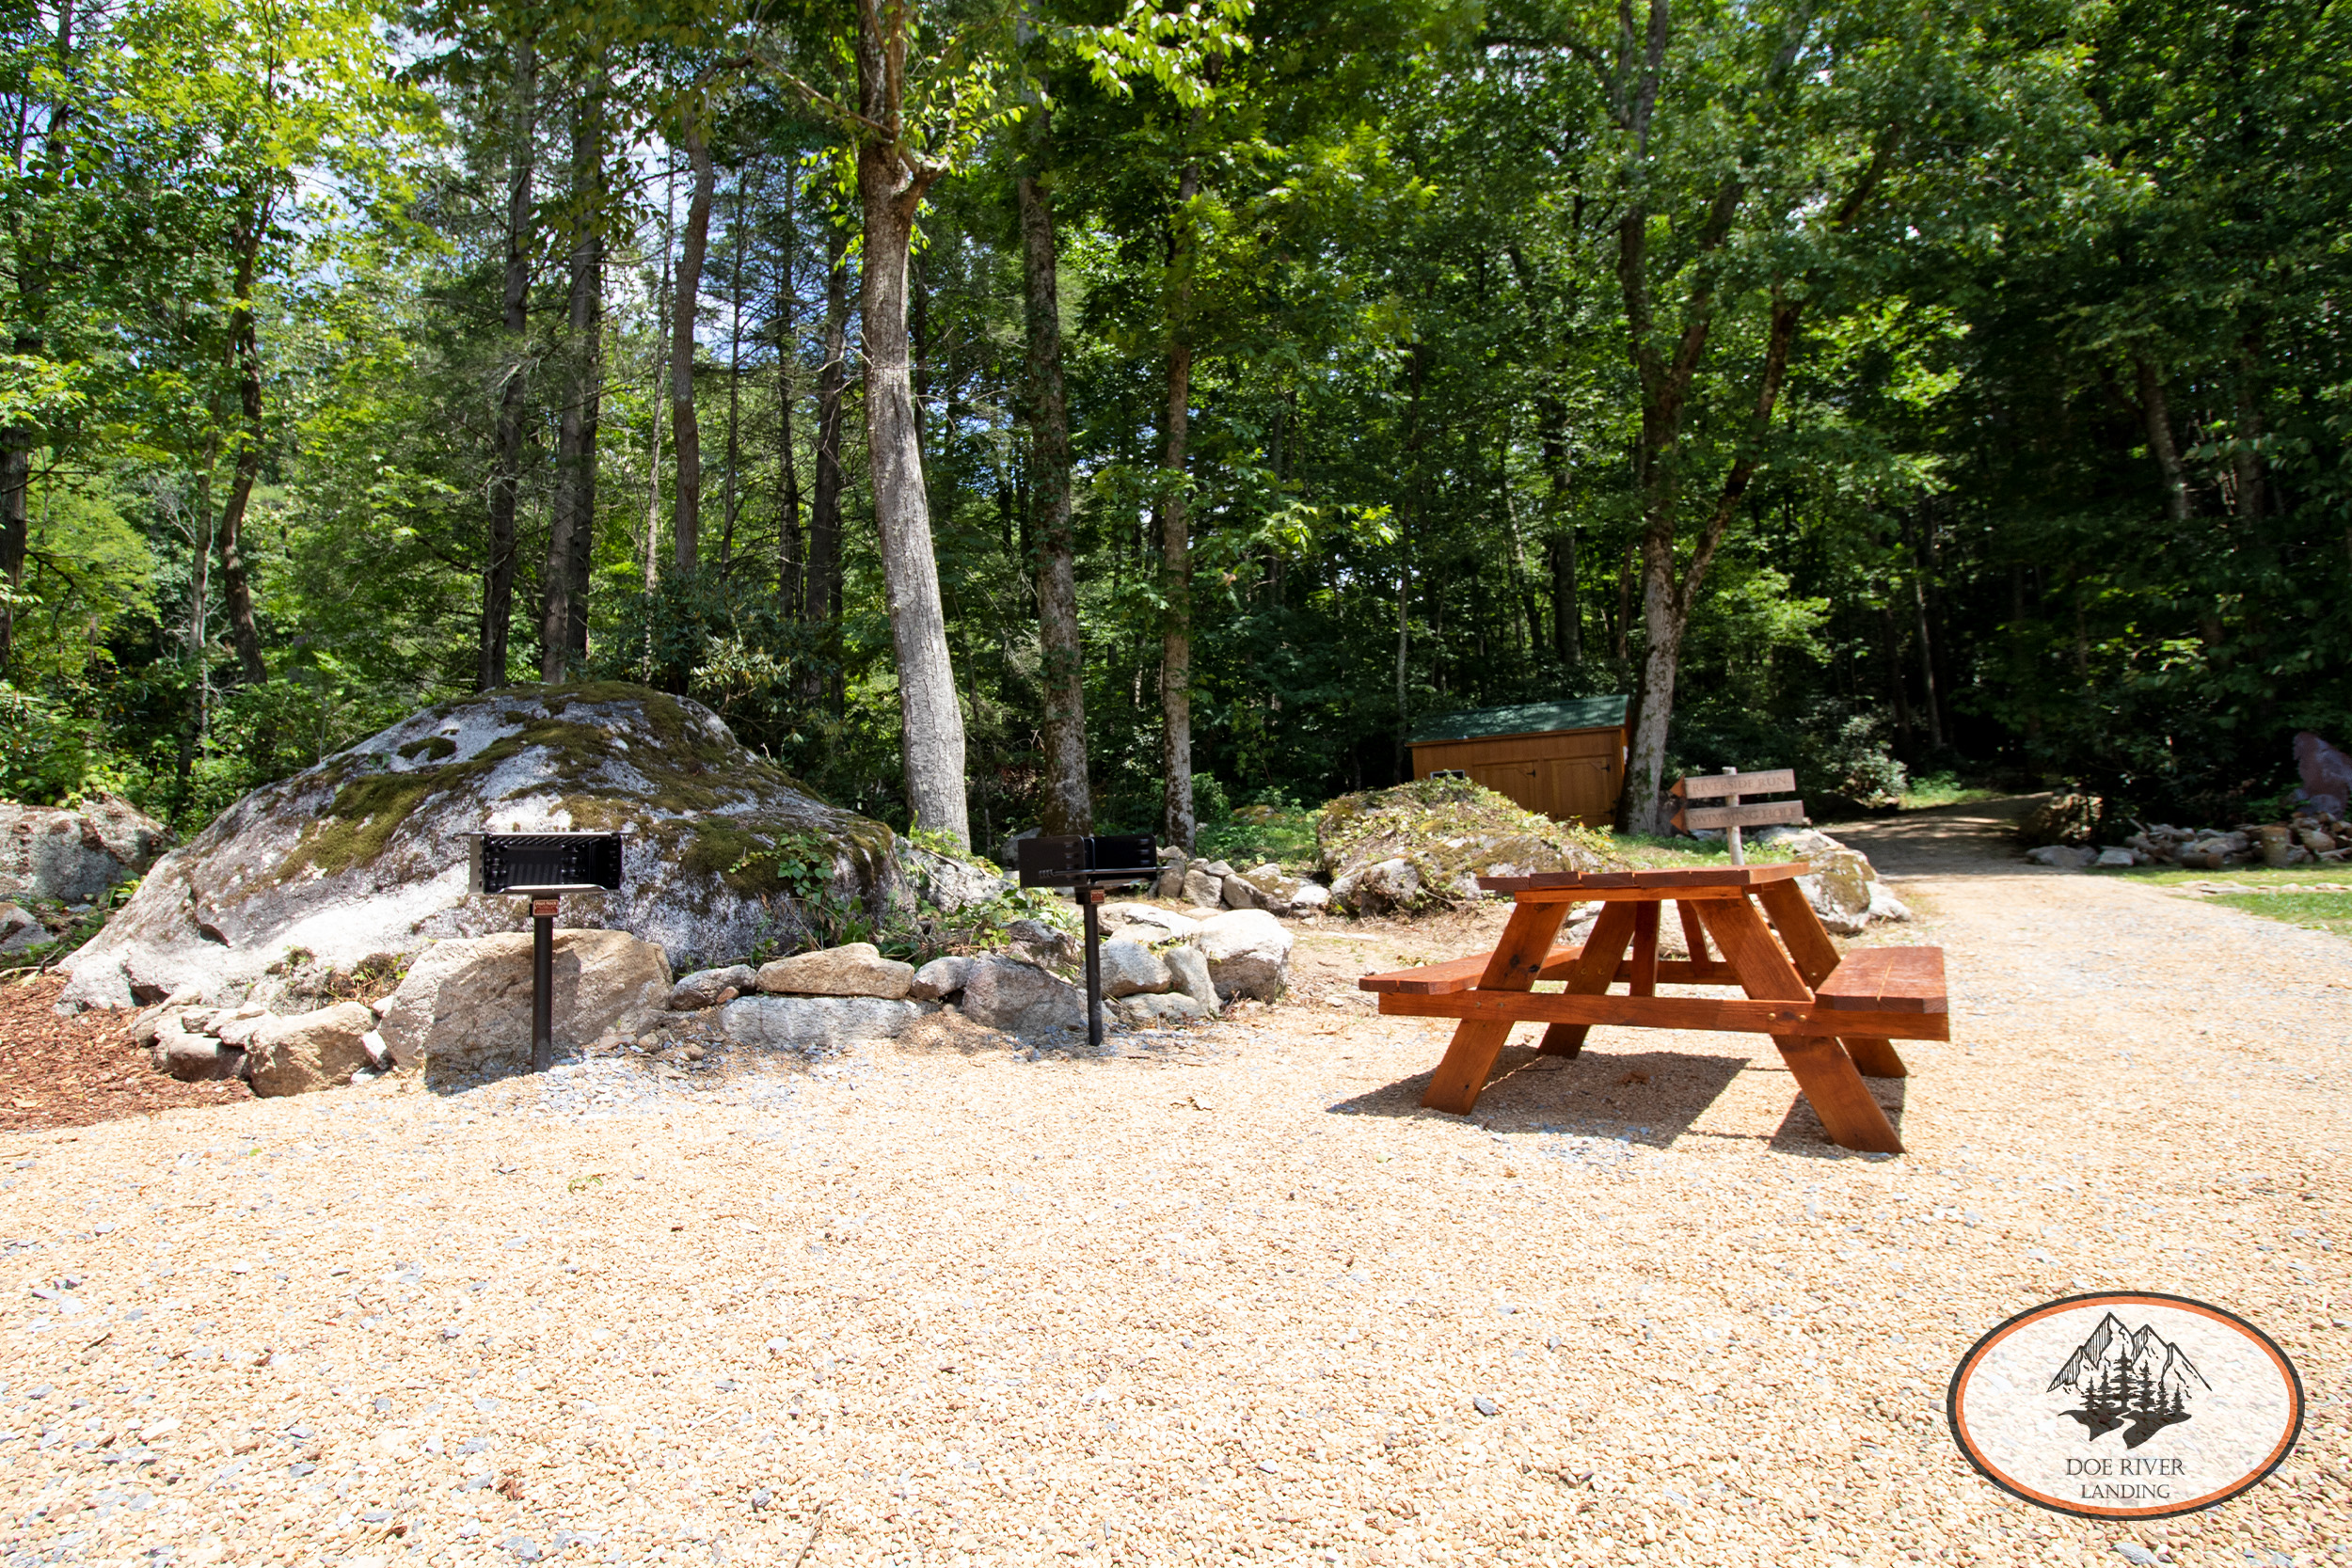 Doe River Landing campground and event venue in Roan Mountain, TN. Best vacation rental and event space near Elizabethton, TN and Johnson City TN. The Water's Edge Pavilion riverside campsite with fire pit, picnic table, grill, and umbrella.